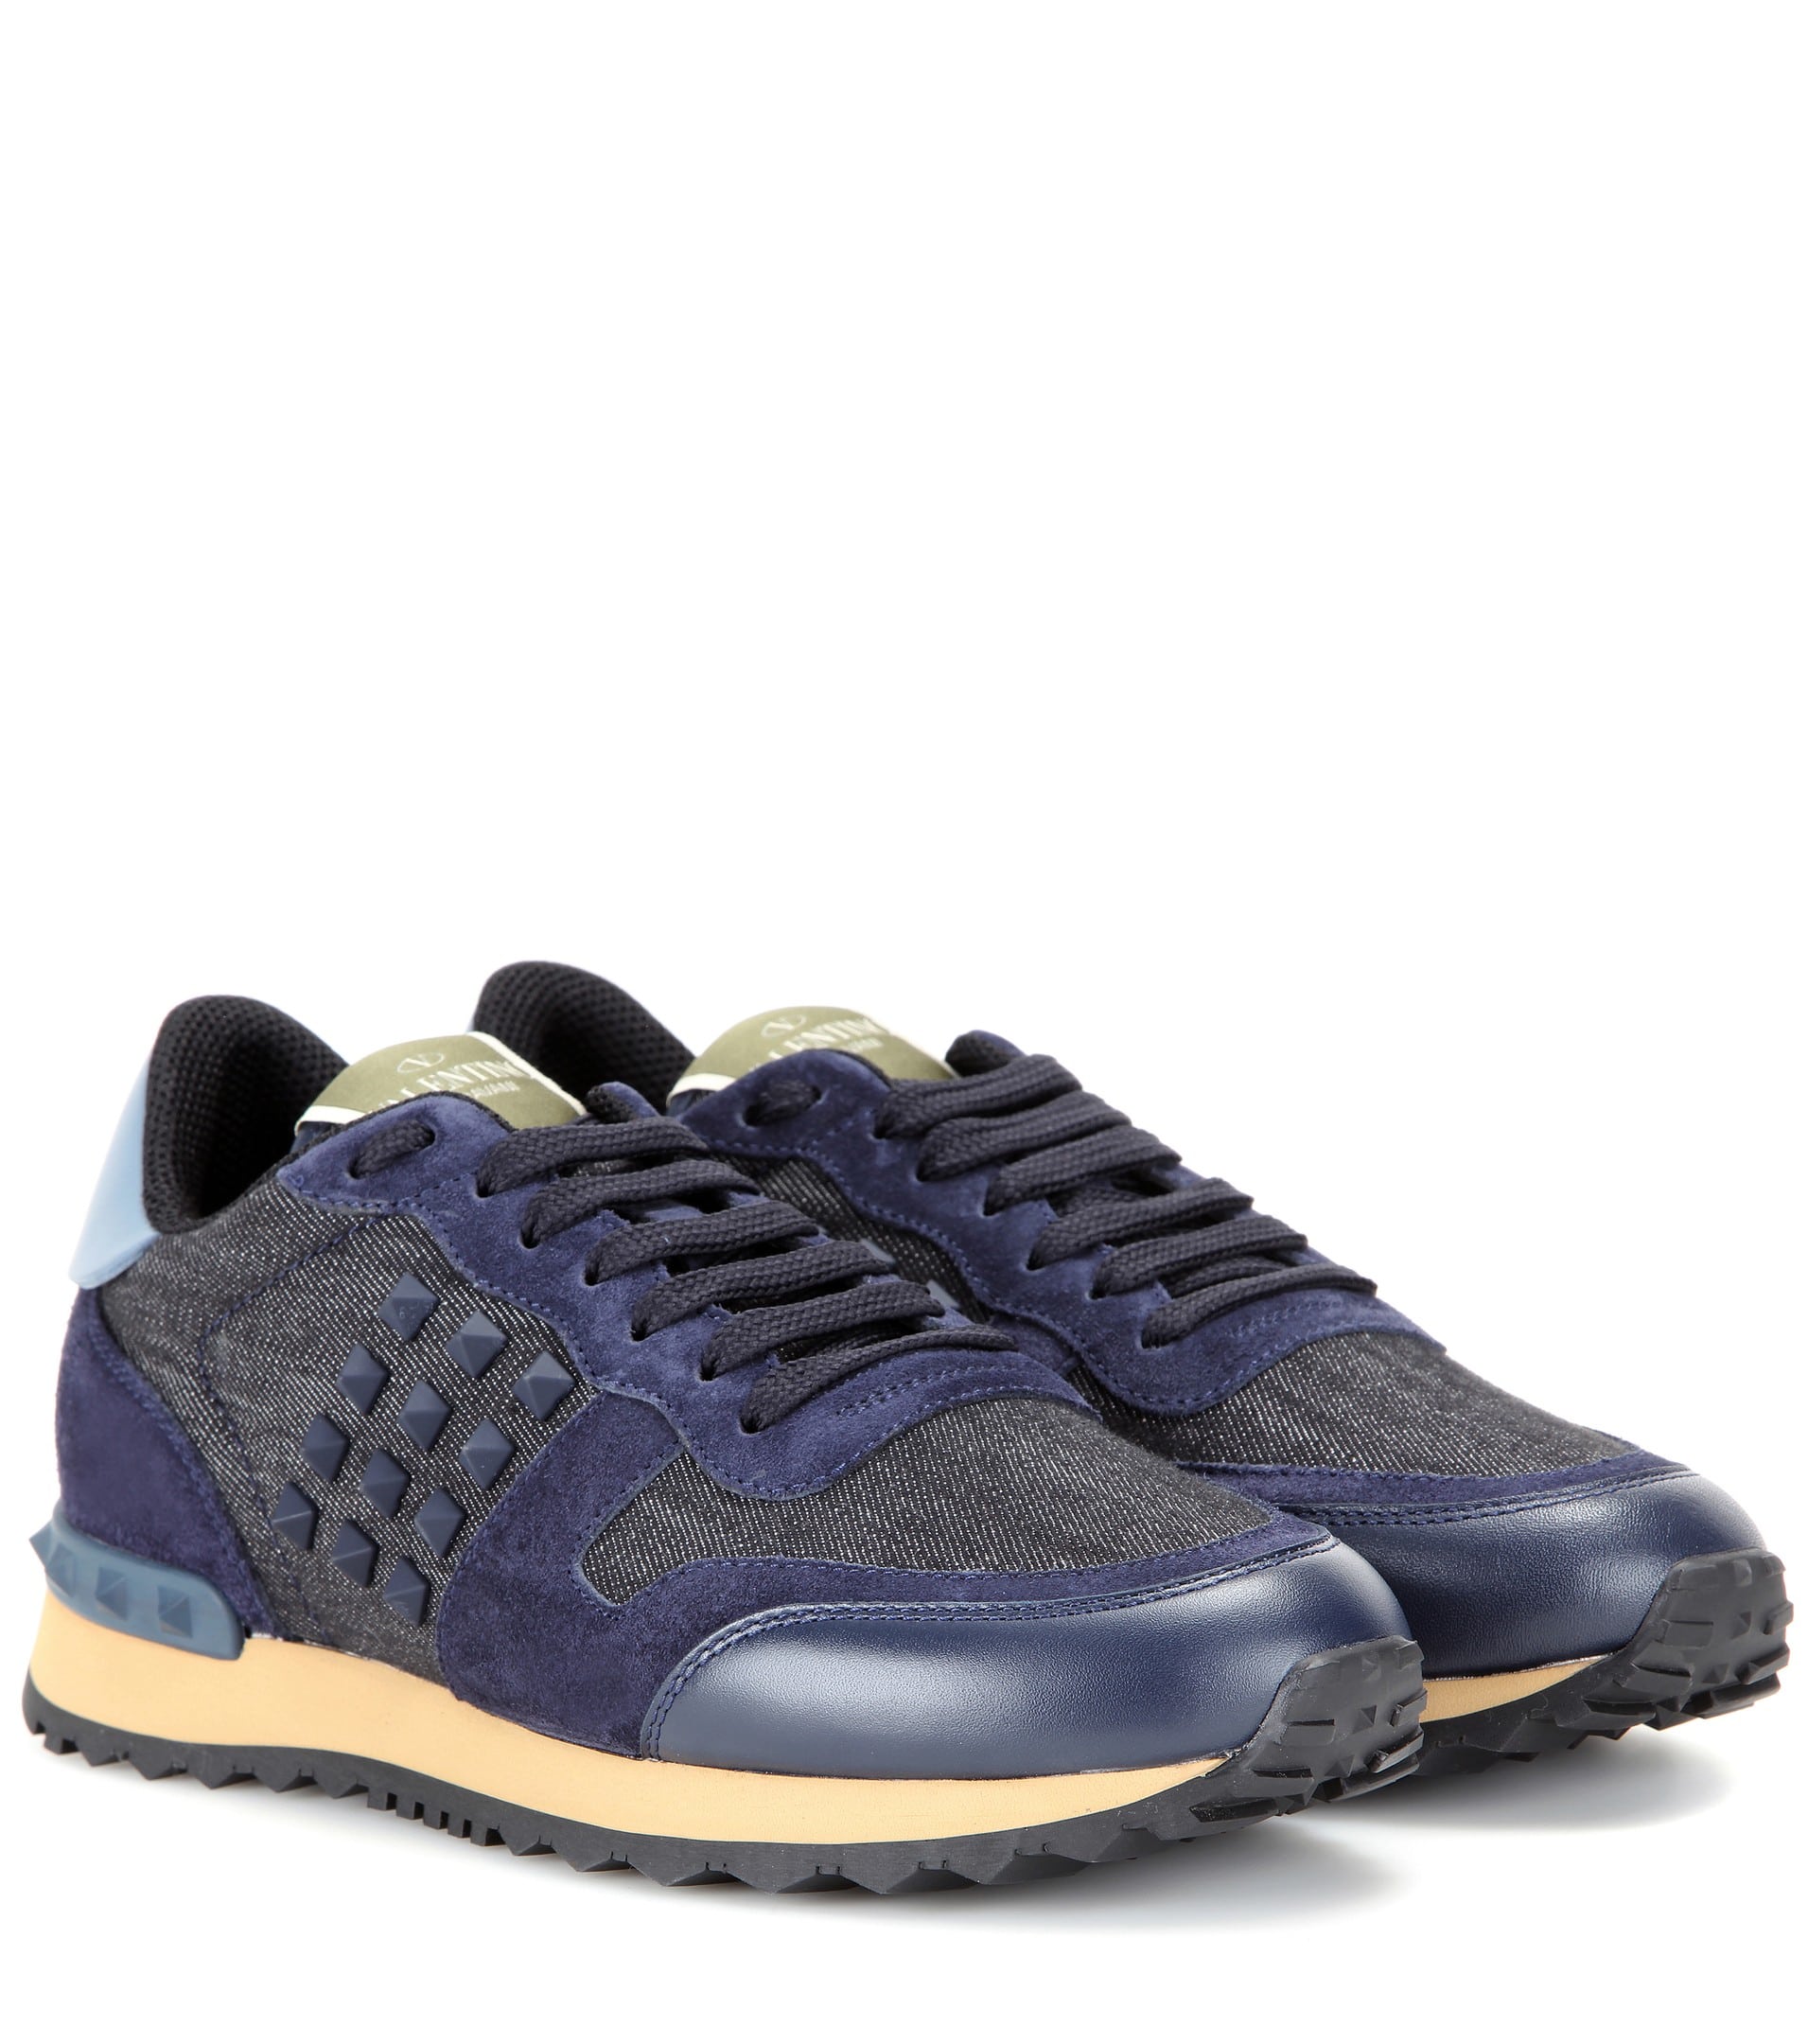 Valentino Rockrunner Denim, Leather And Suede Sneakers